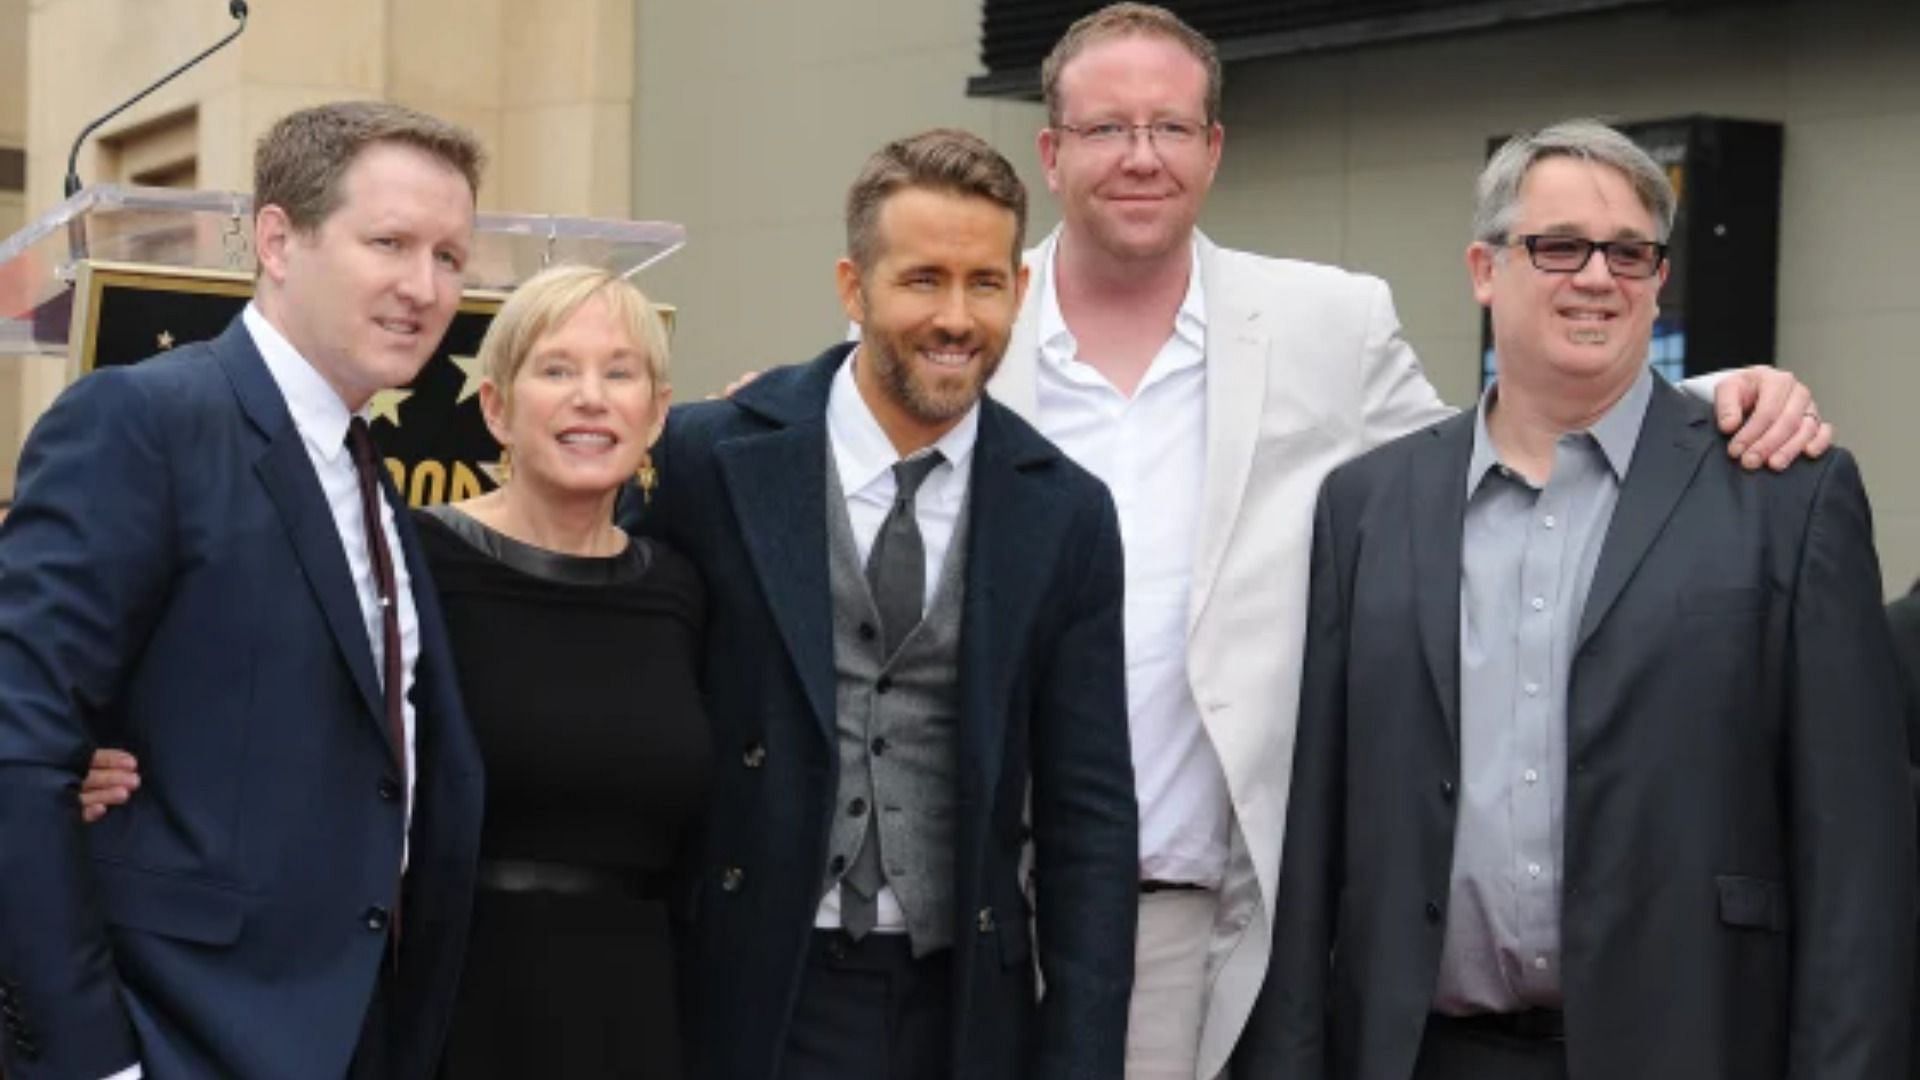 Ryan Reynolds with his three older brothers and mother, Tammy Reynolds. (Image via Getty Images/Frank Trapper)